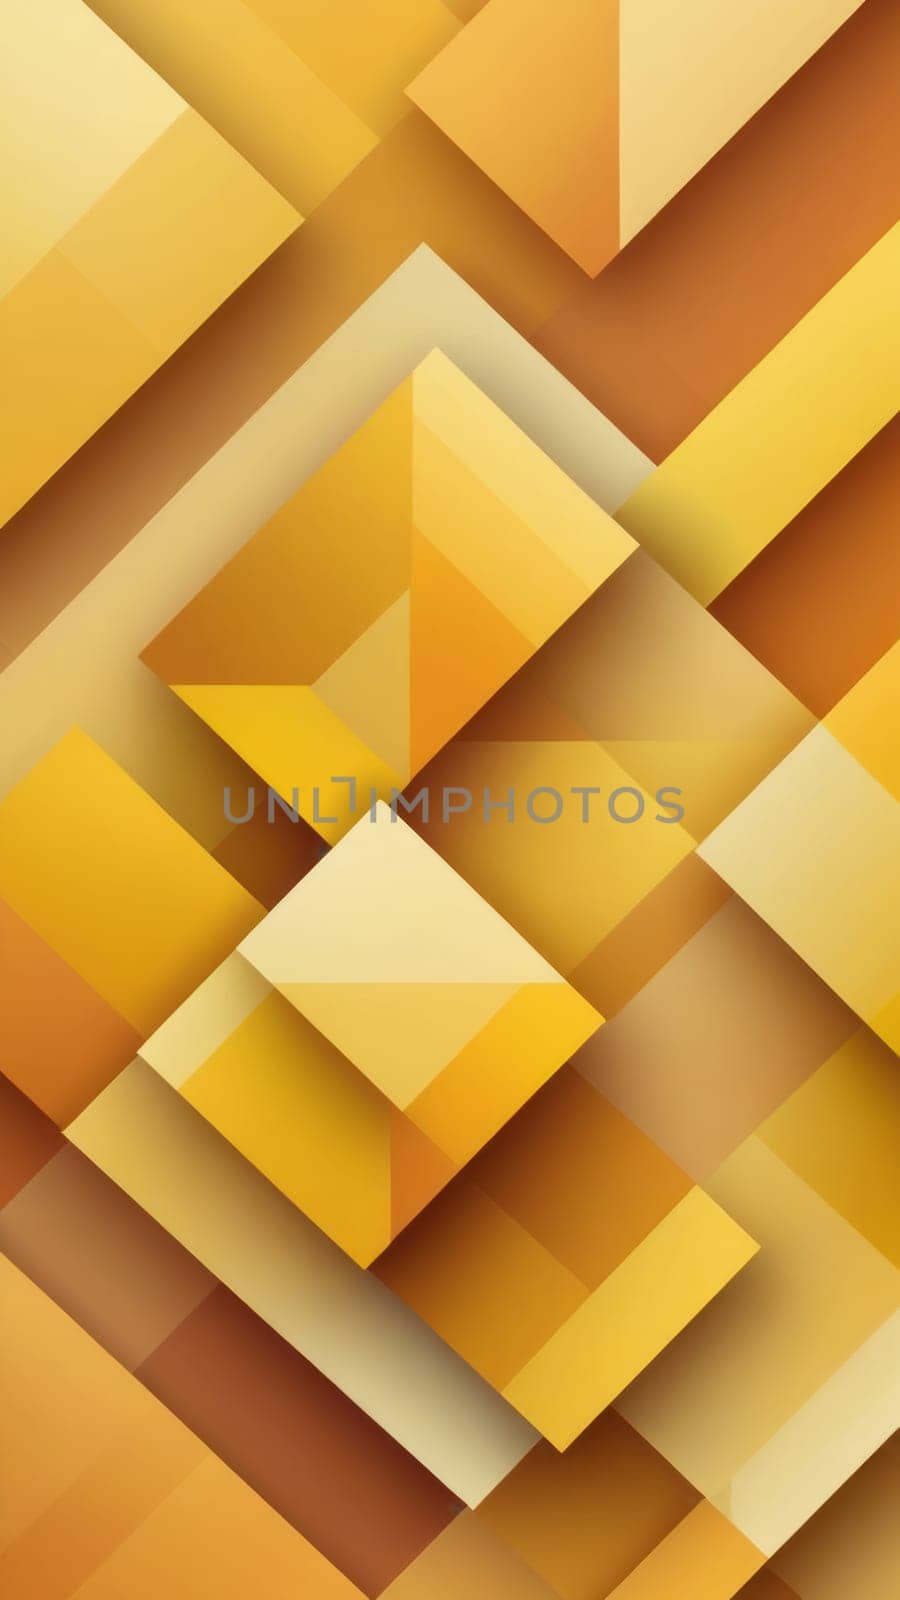 Art for inspiration from Cubist shapes and yellow by nkotlyar